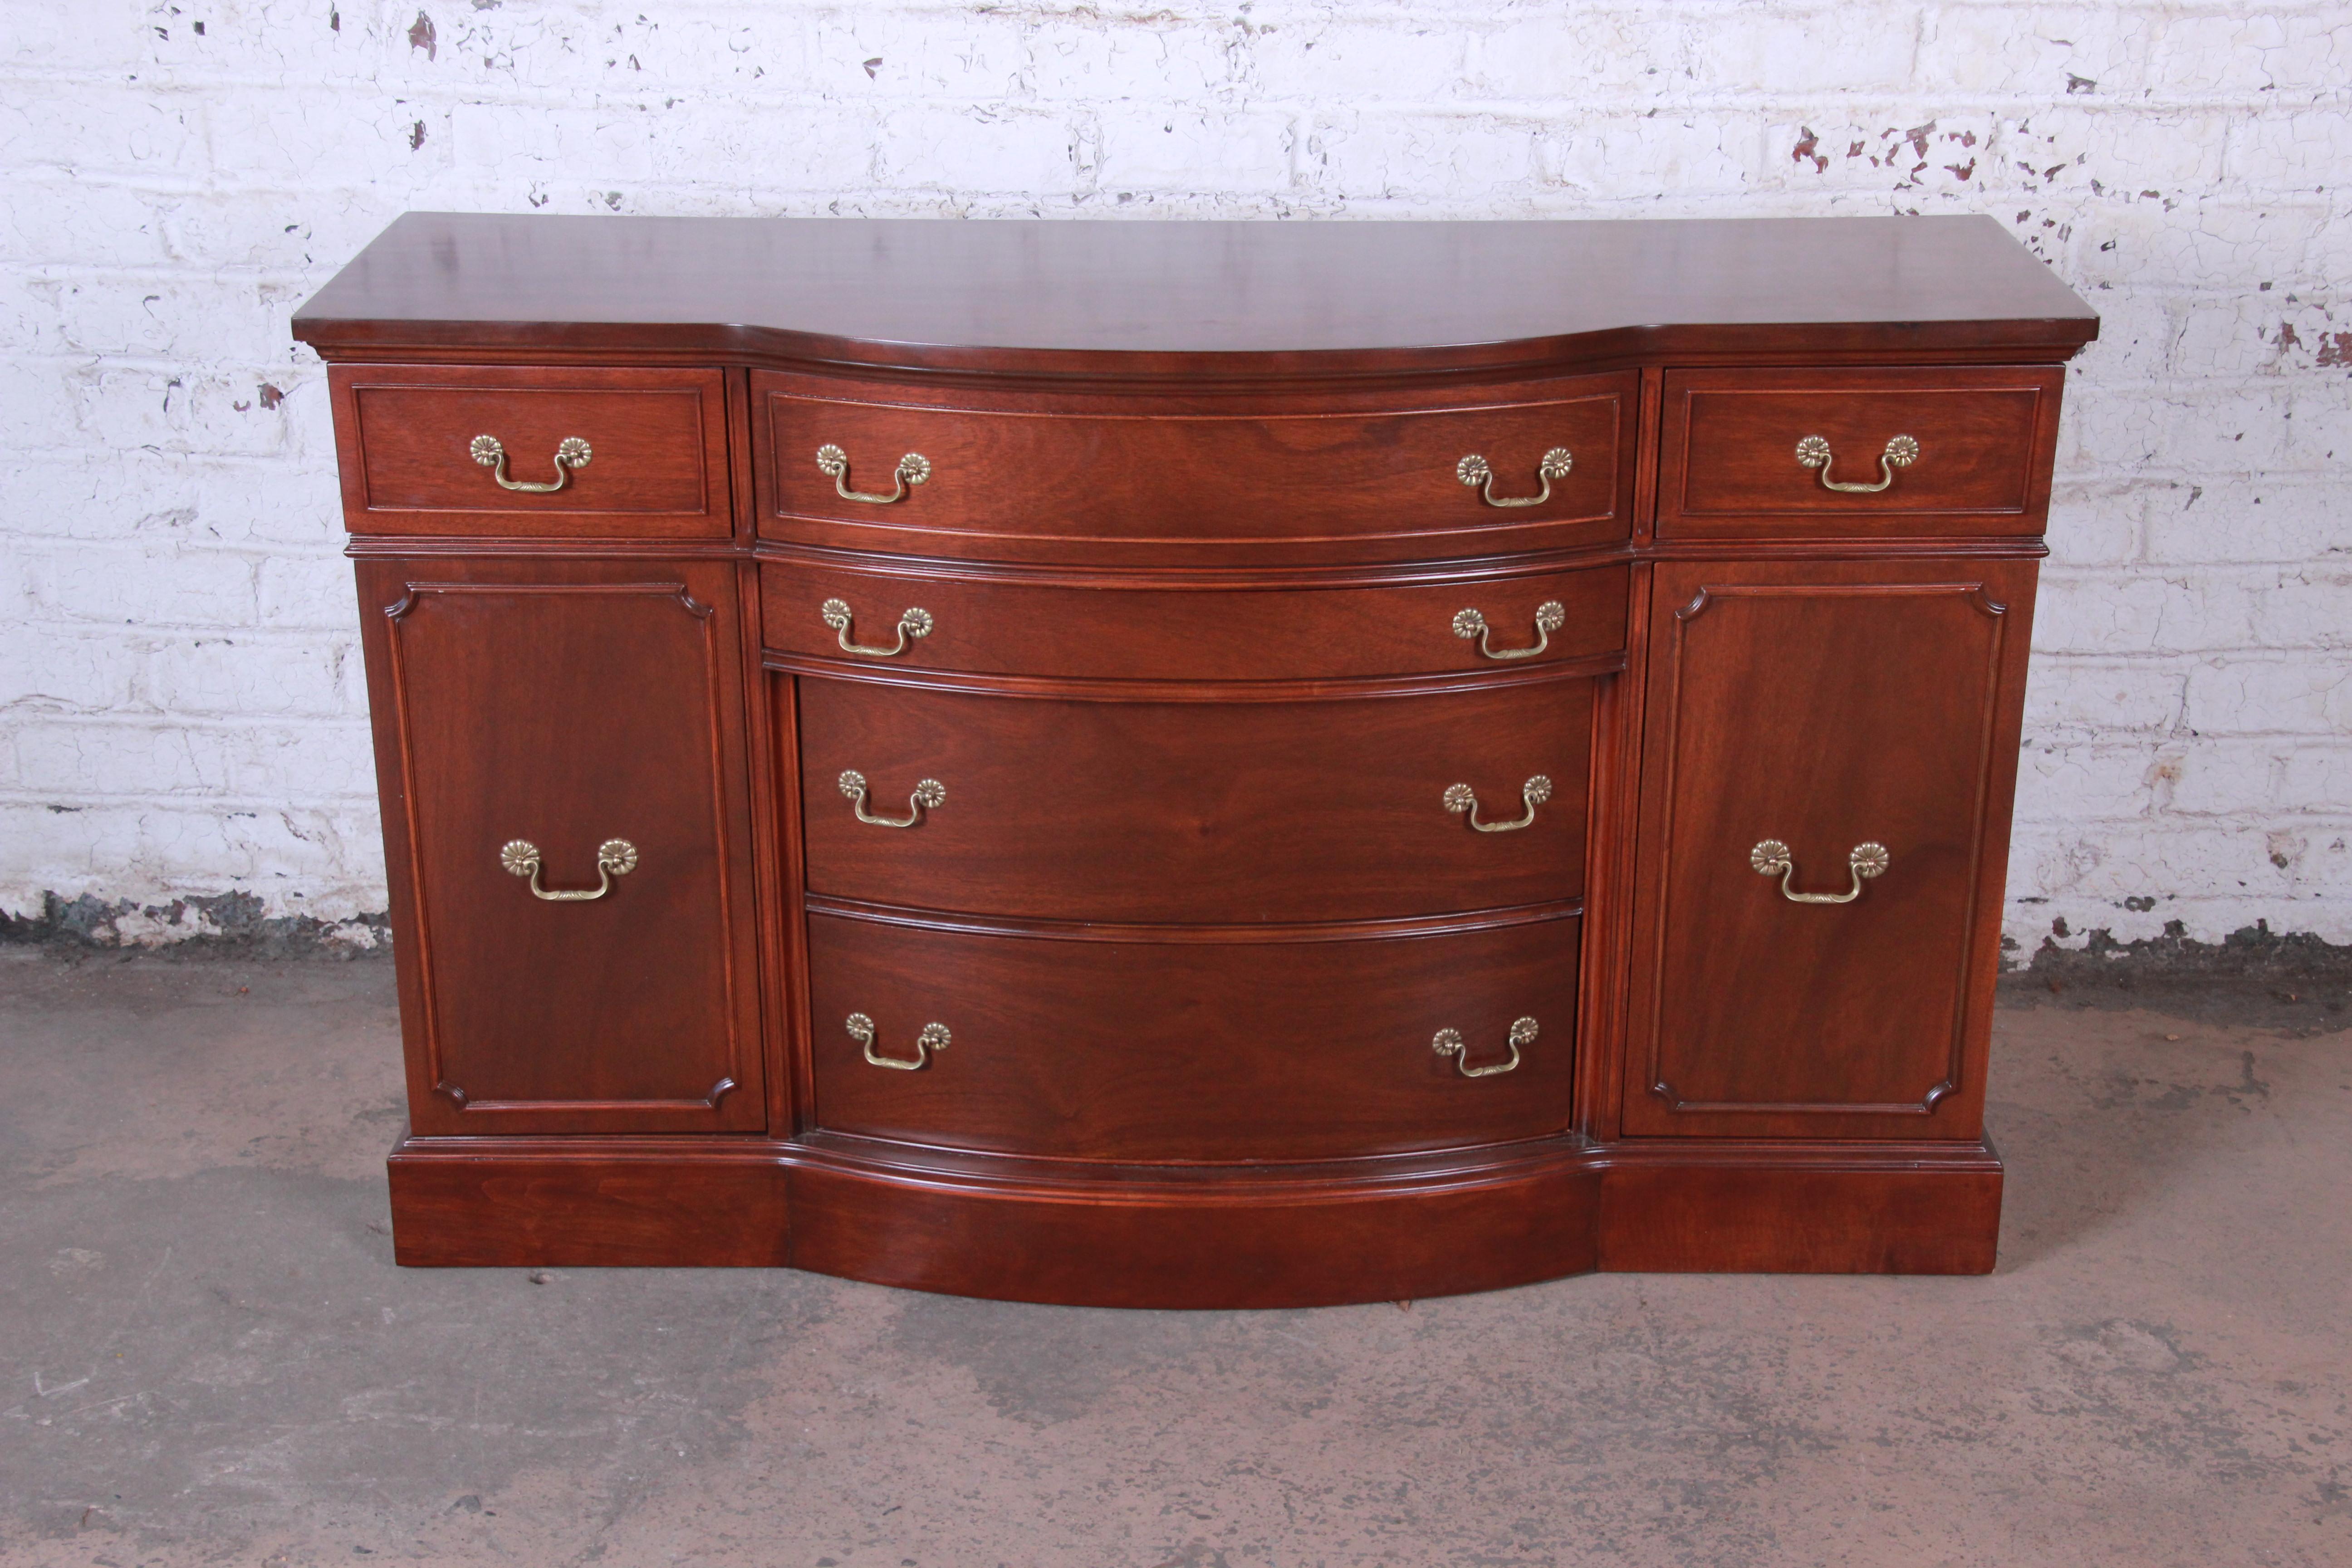 A gorgeous vintage mahogany bow front sideboard buffet. The sideboard features stunning mahogany wood grain and stylish original brass hardware. It offers ample room for storage, with six deep drawers and two cabinets. The sideboard has recently